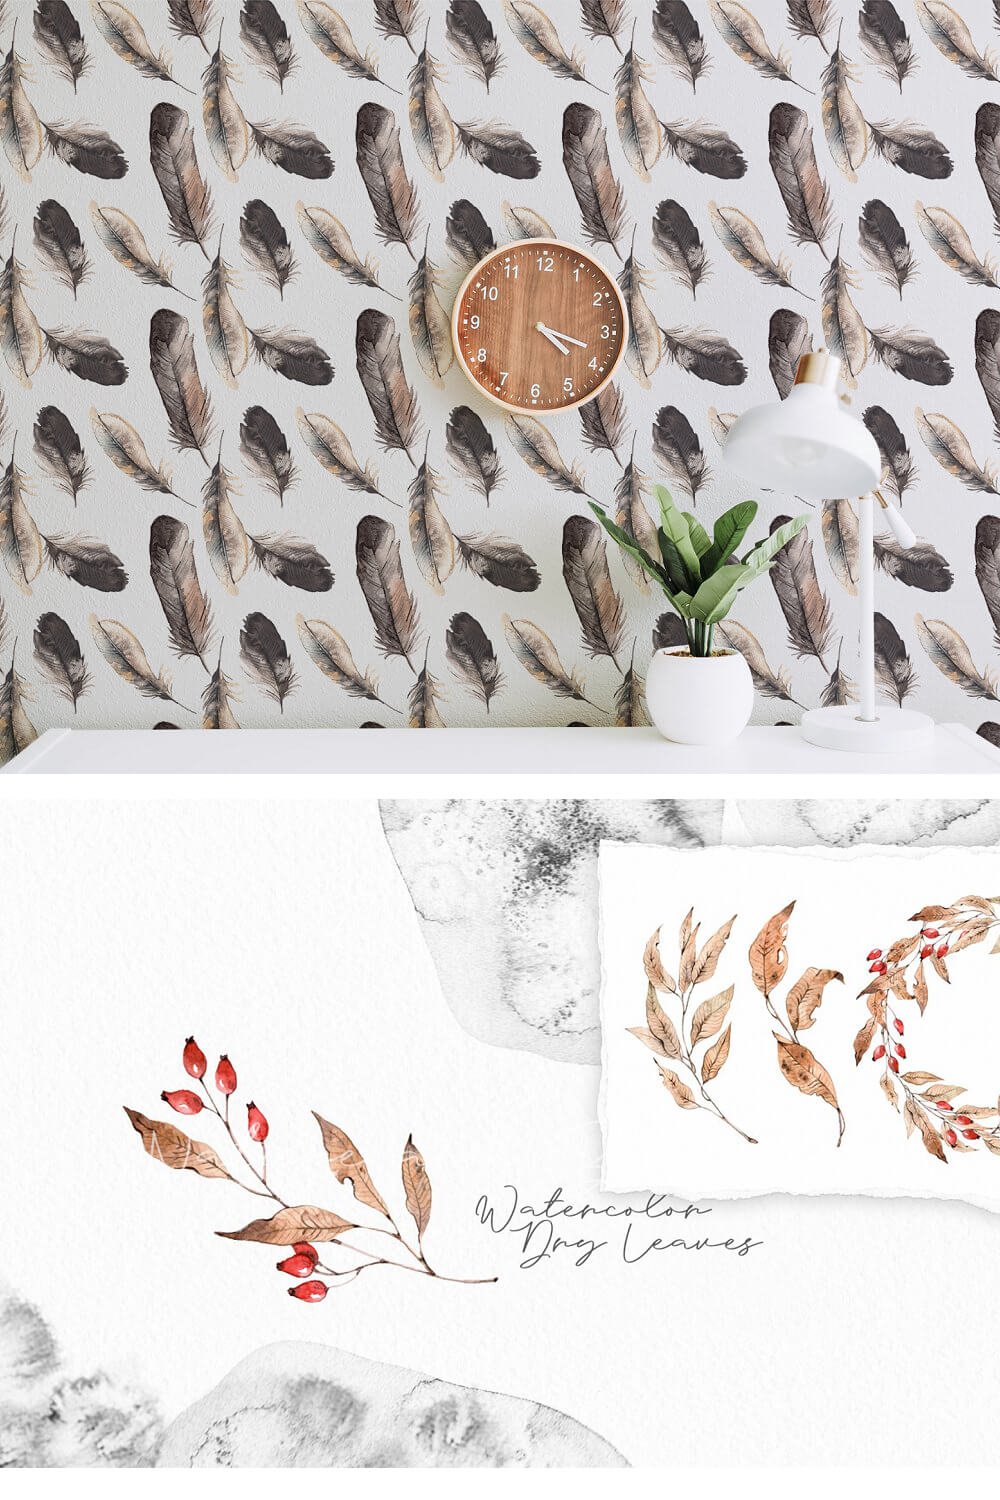 Watercolor drawings of dry leaves and feathers.